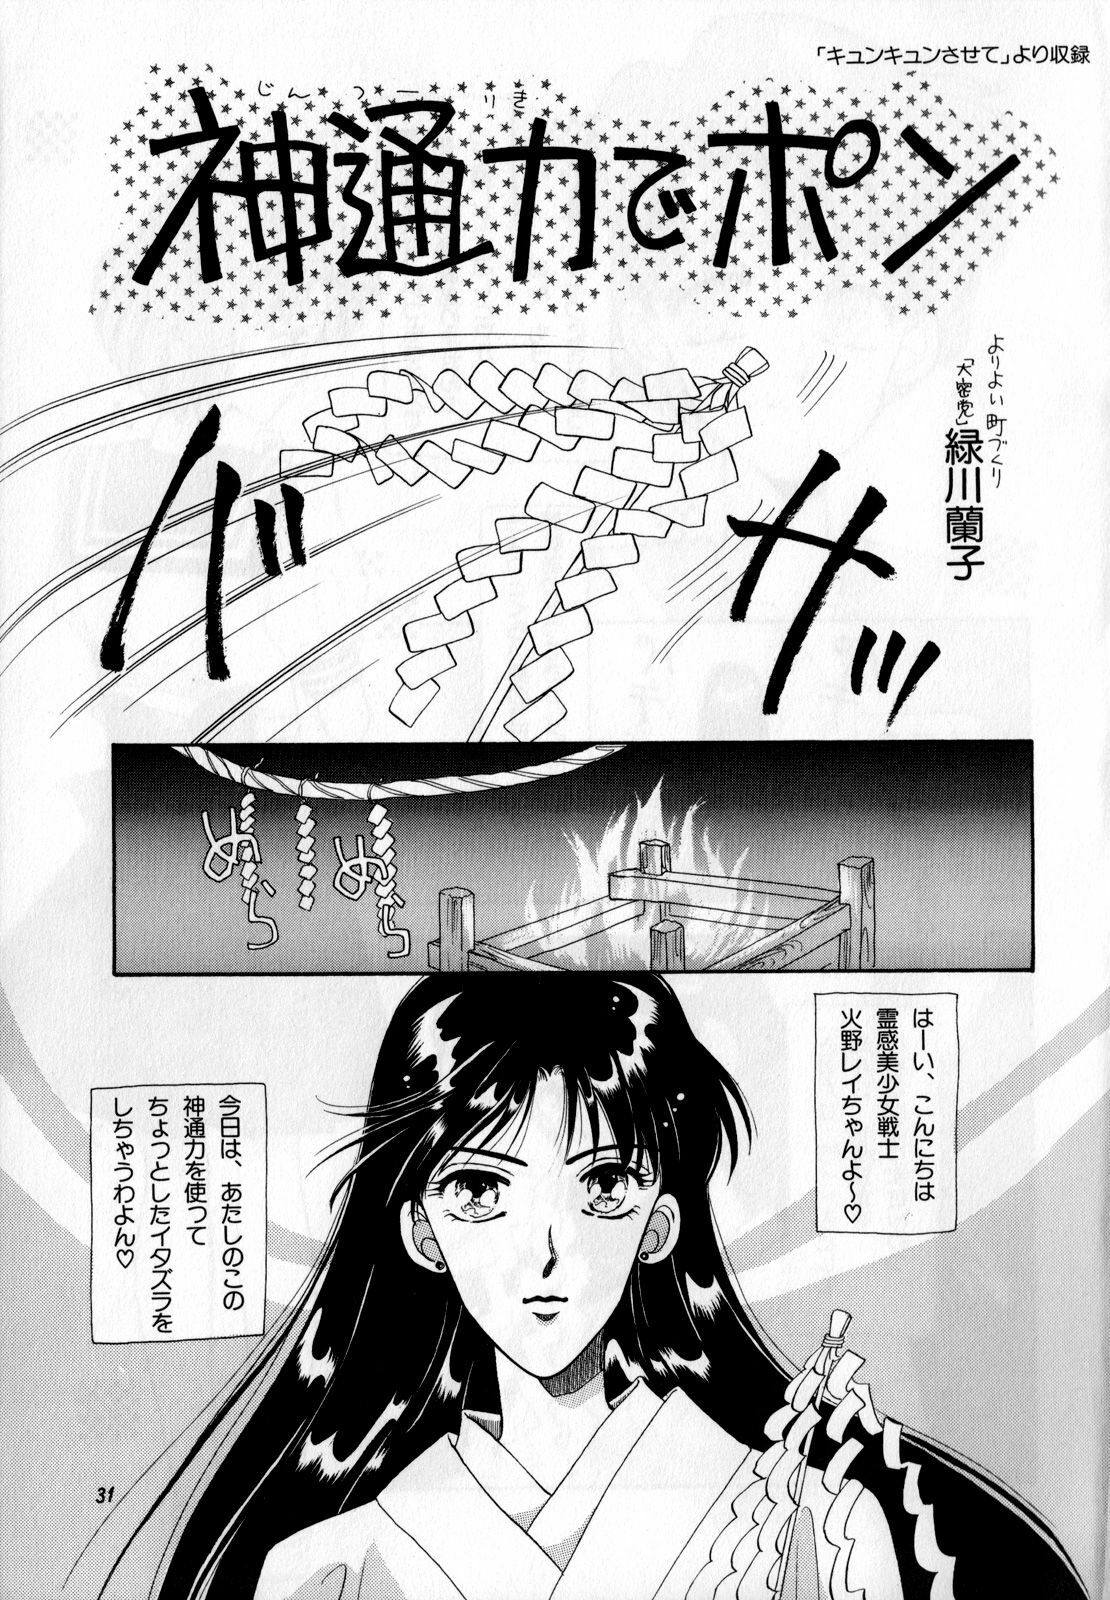 [Anthology] Lunatic Party 1 (Sailor Moon) page 4 full